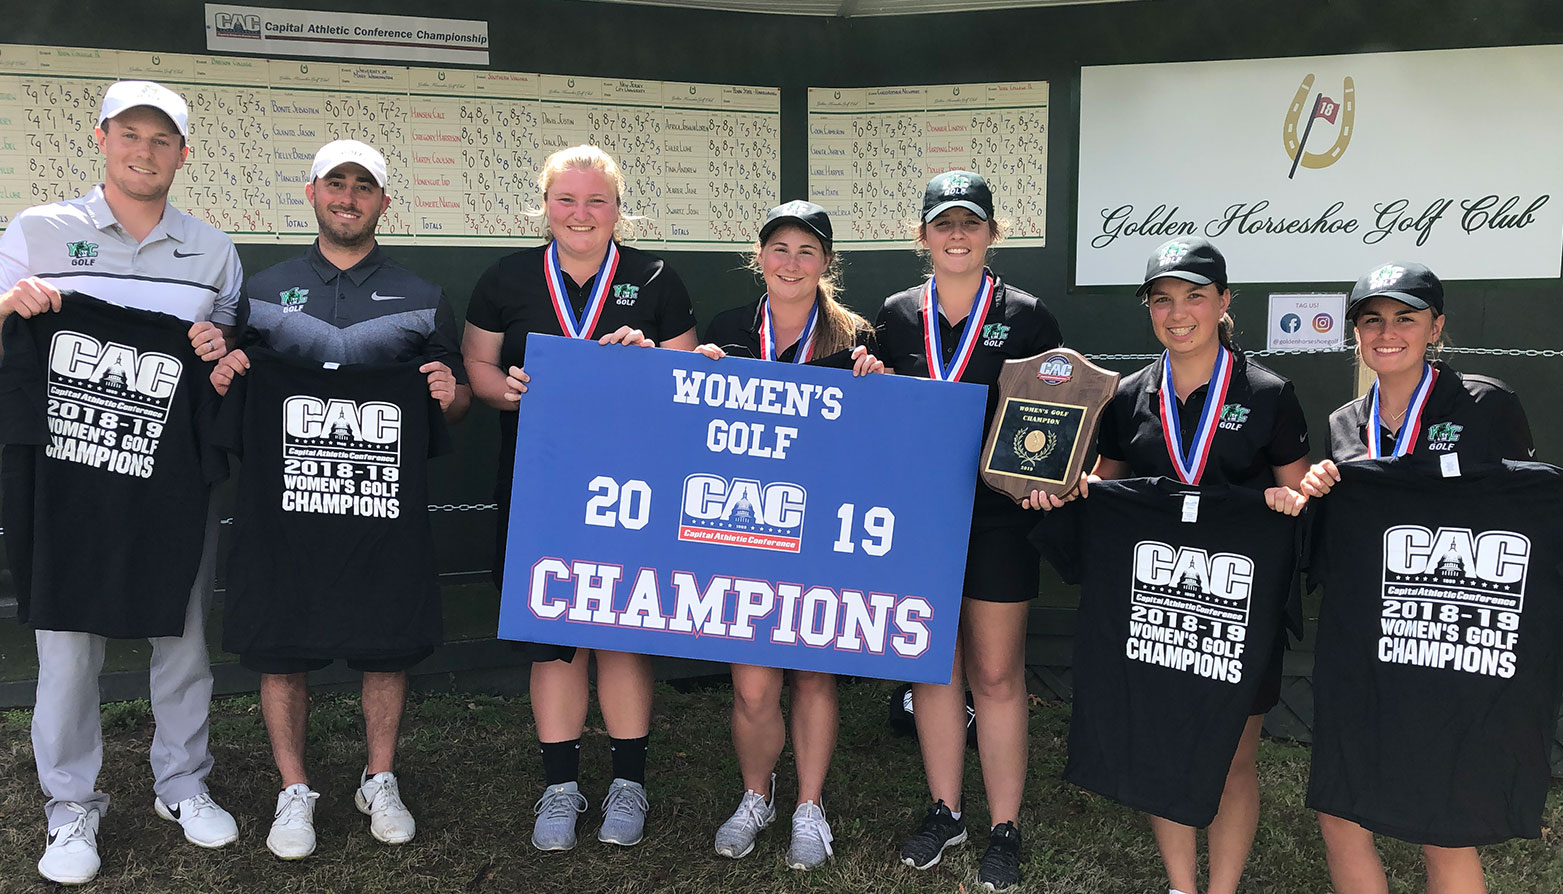 York Outduels Christopher Newport to Win 2019 CAC Women's Golf Championship